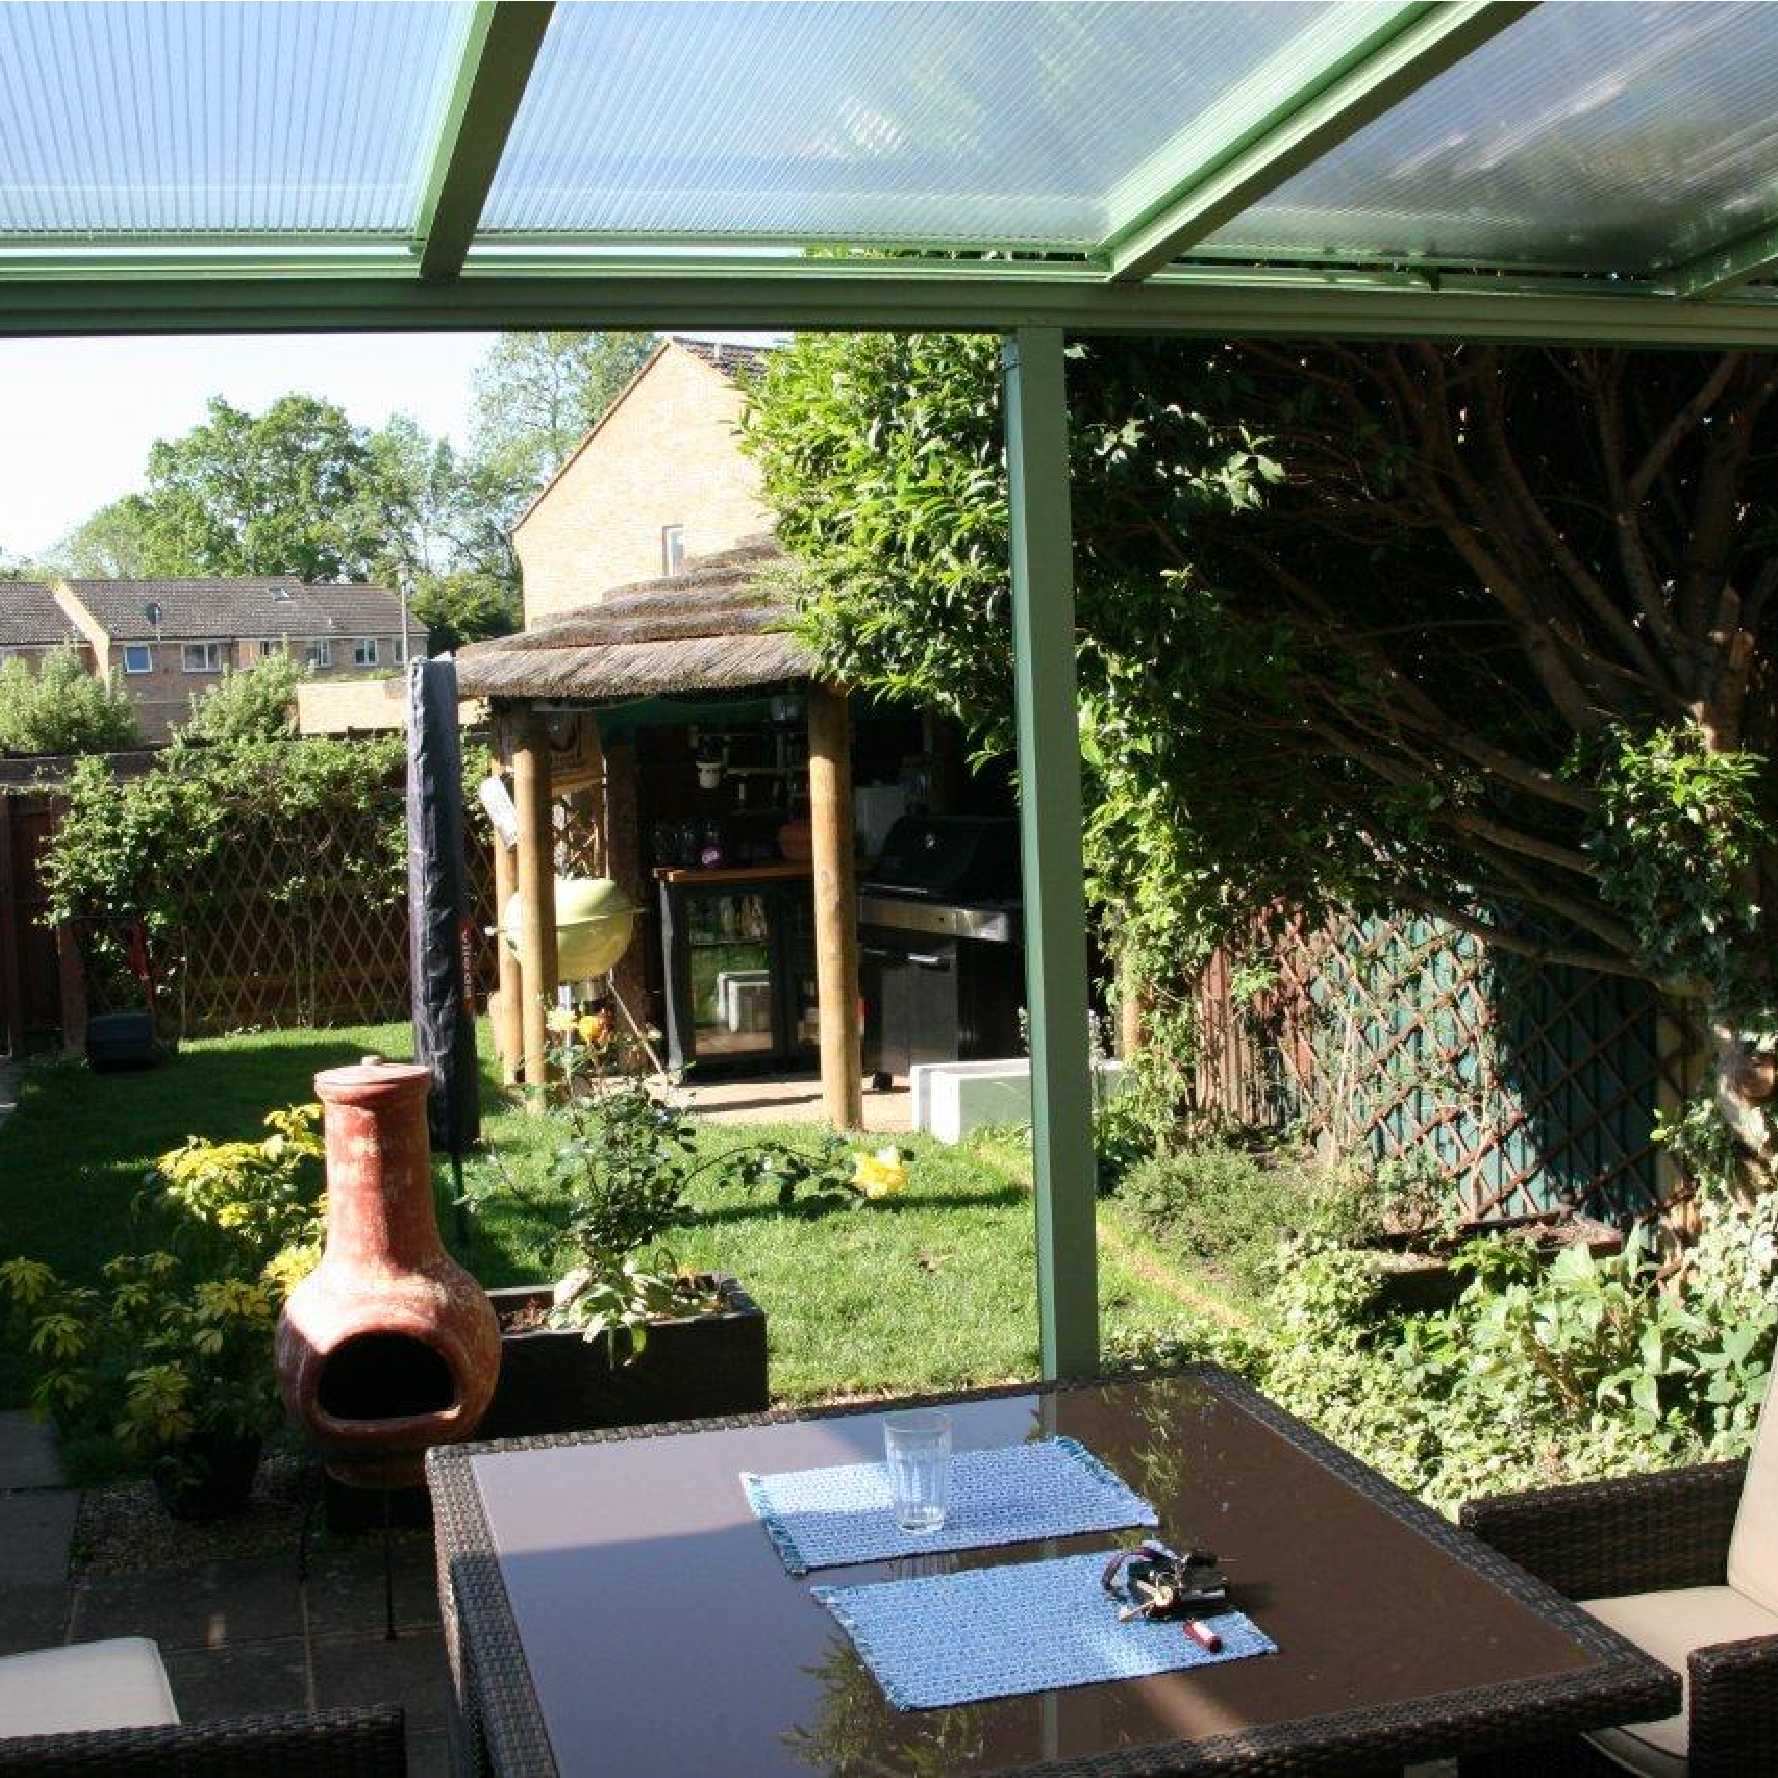 Affordable Omega Smart Lean-To Canopy, White with 16mm Polycarbonate Glazing - 2.1m (W) x 1.5m (P), (2) Supporting Posts